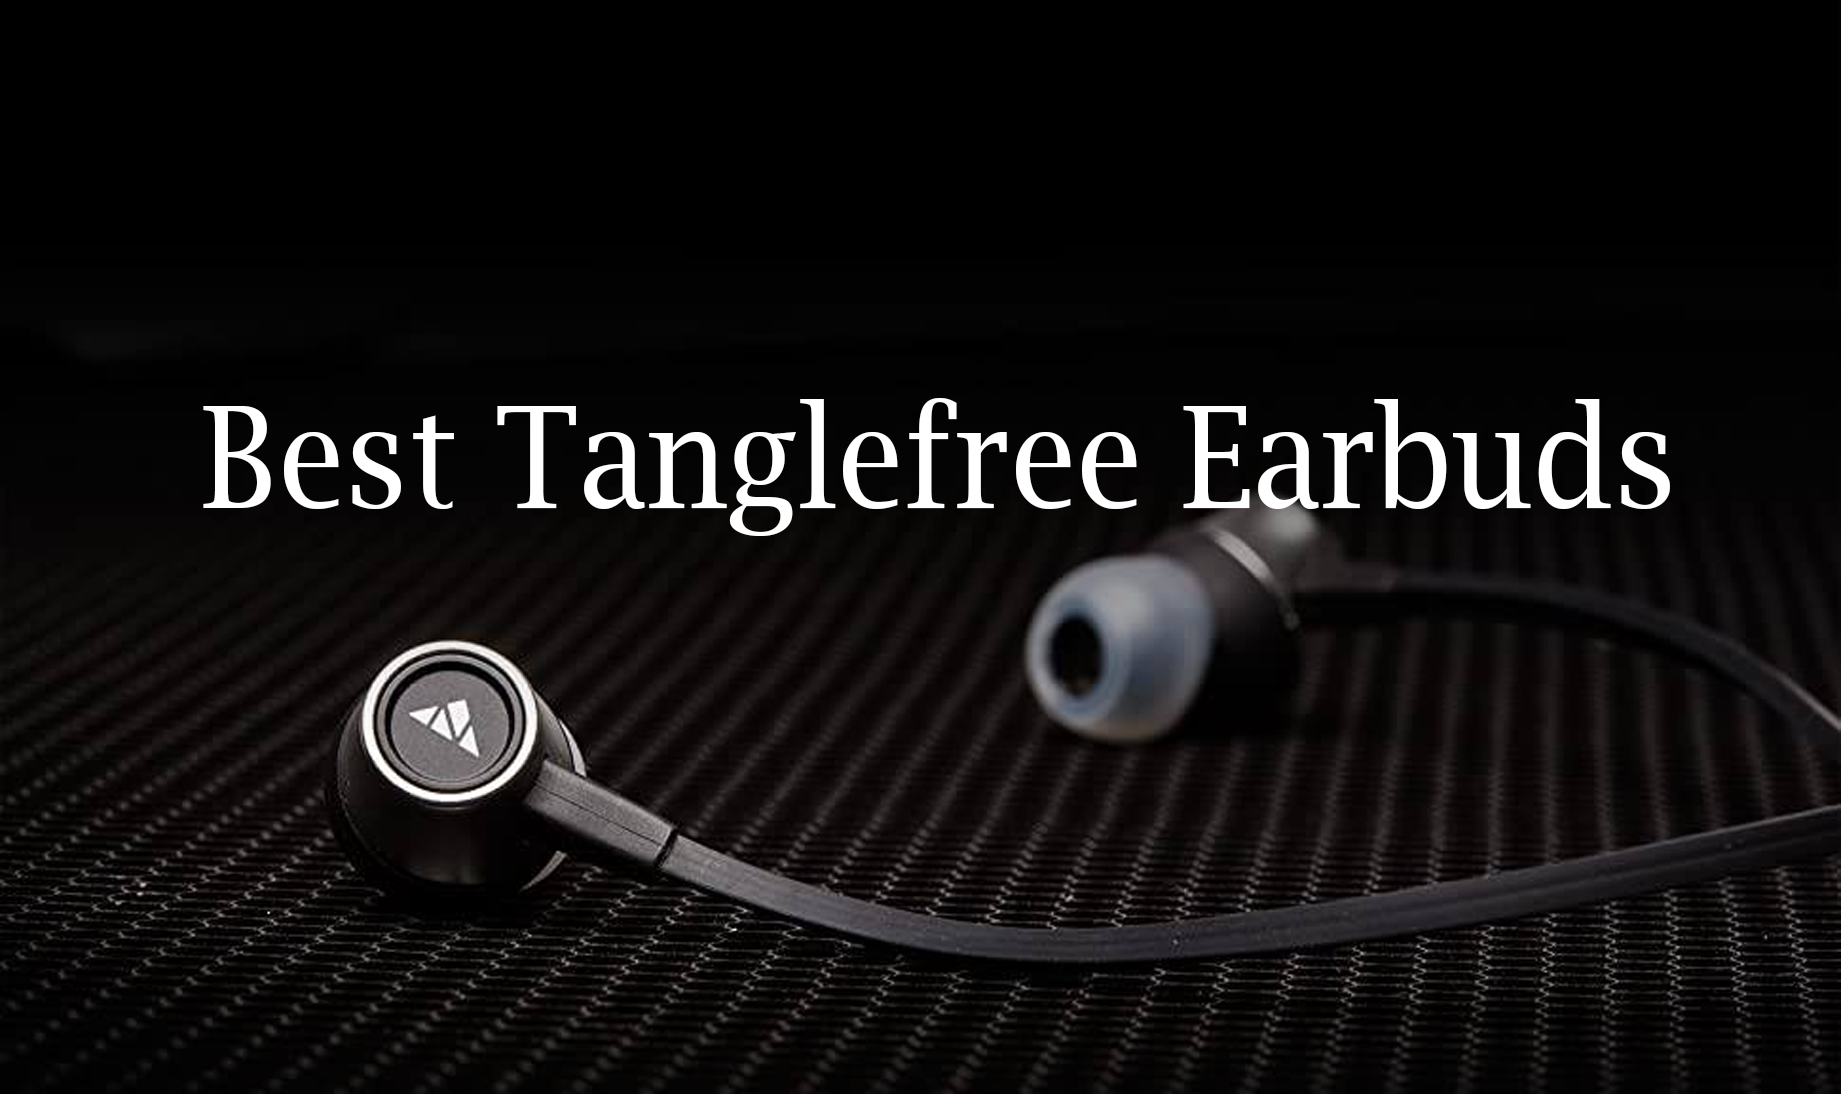 Best Tangle free Earbuds